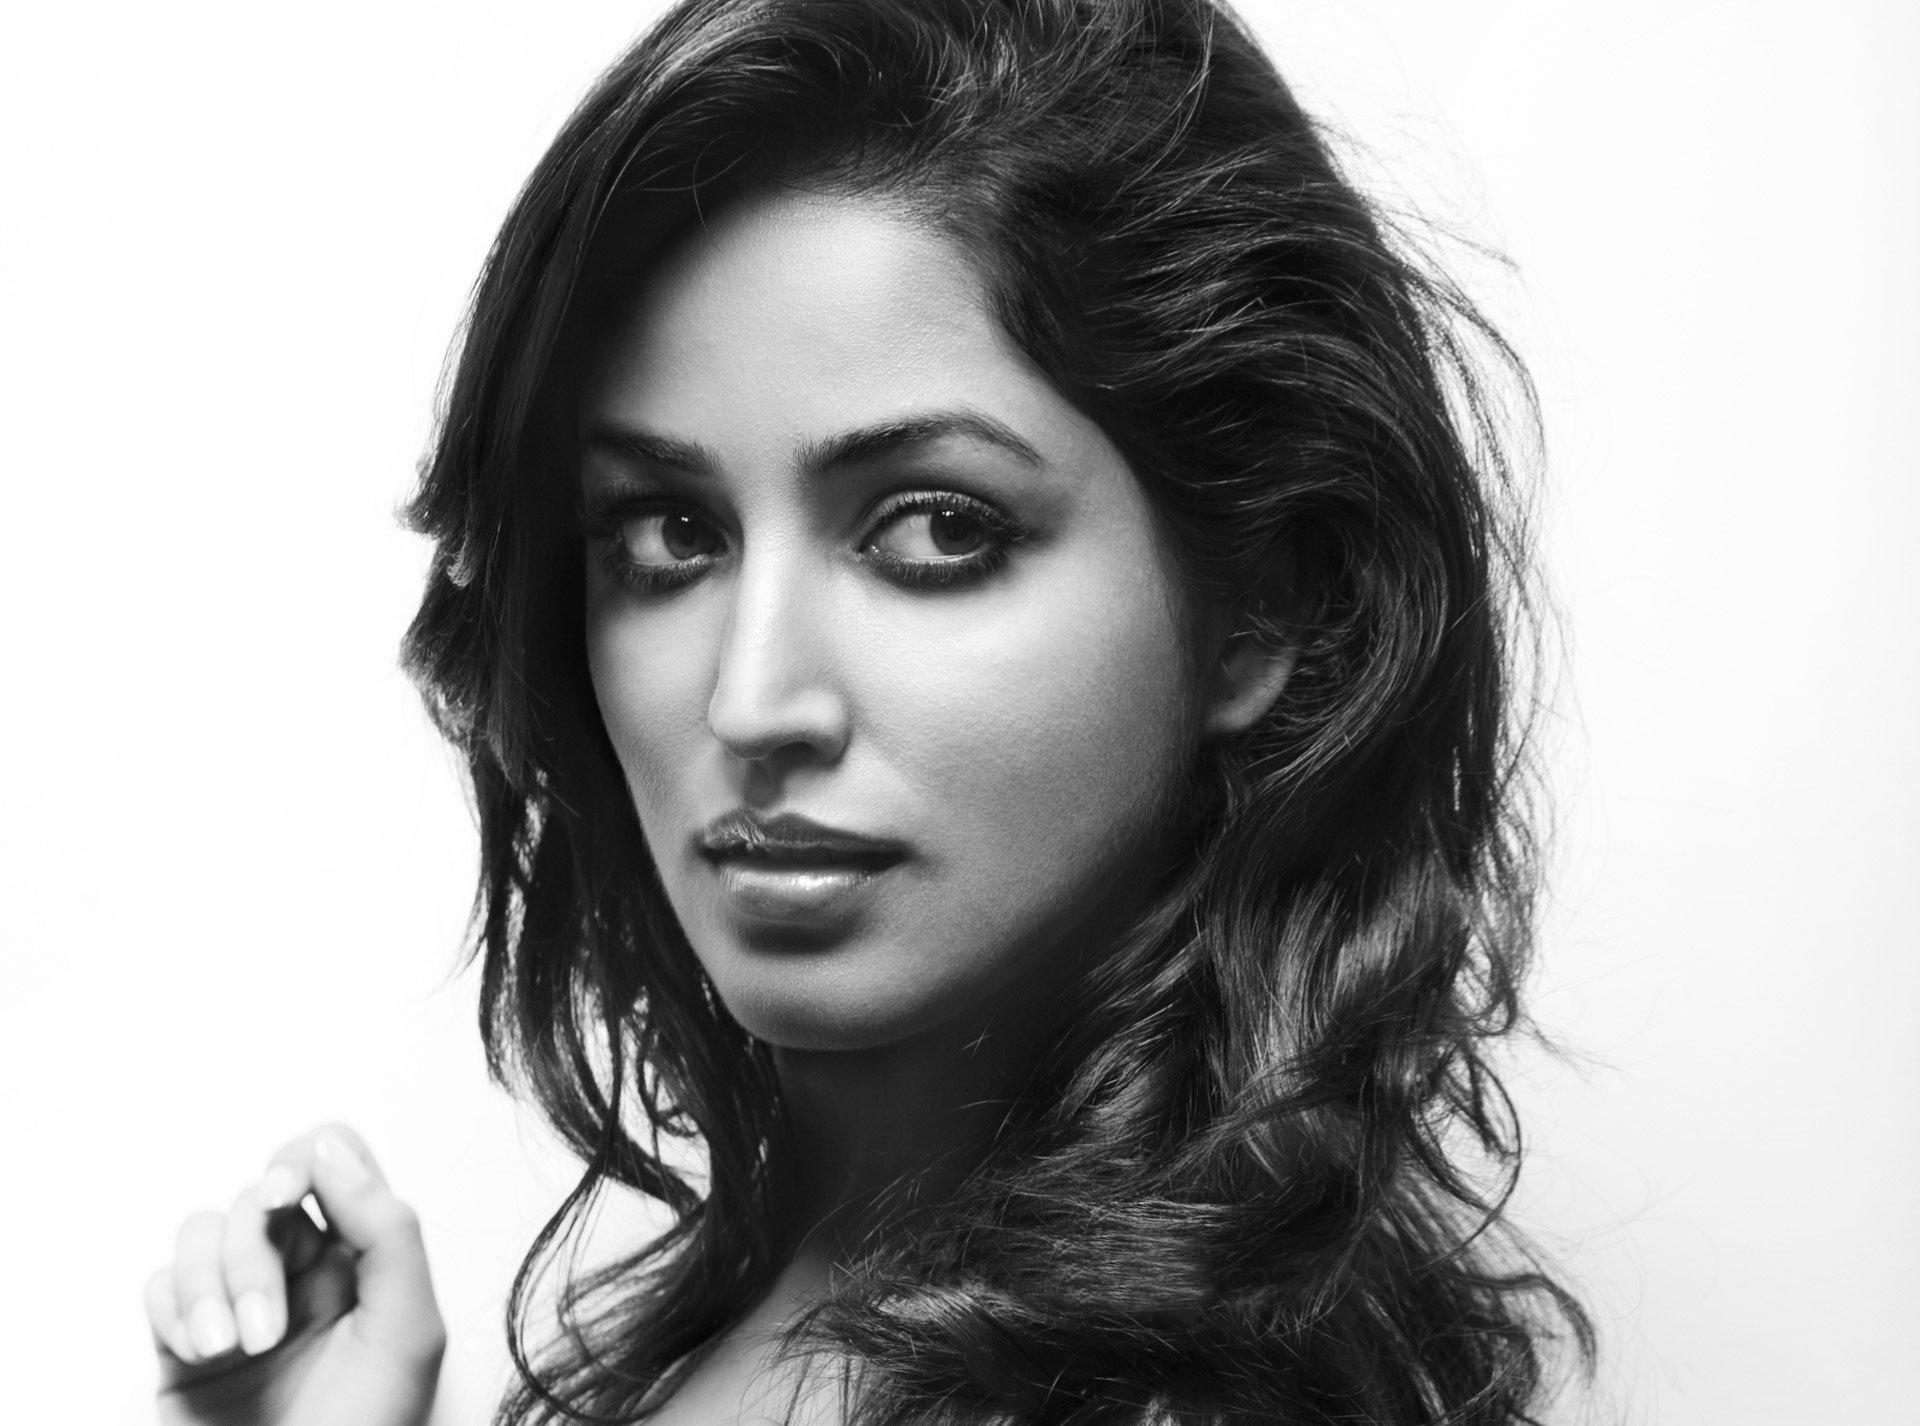 yami, Gautam, Bollywood, Actress, Model, Girl, Beautiful, Brunette, Pretty,  Cute, Beauty, Sexy, Hot, Pose, Face, Eyes, Hair, Lips, Smile, Figure, India  Wallpapers HD / Desktop and Mobile Backgrounds